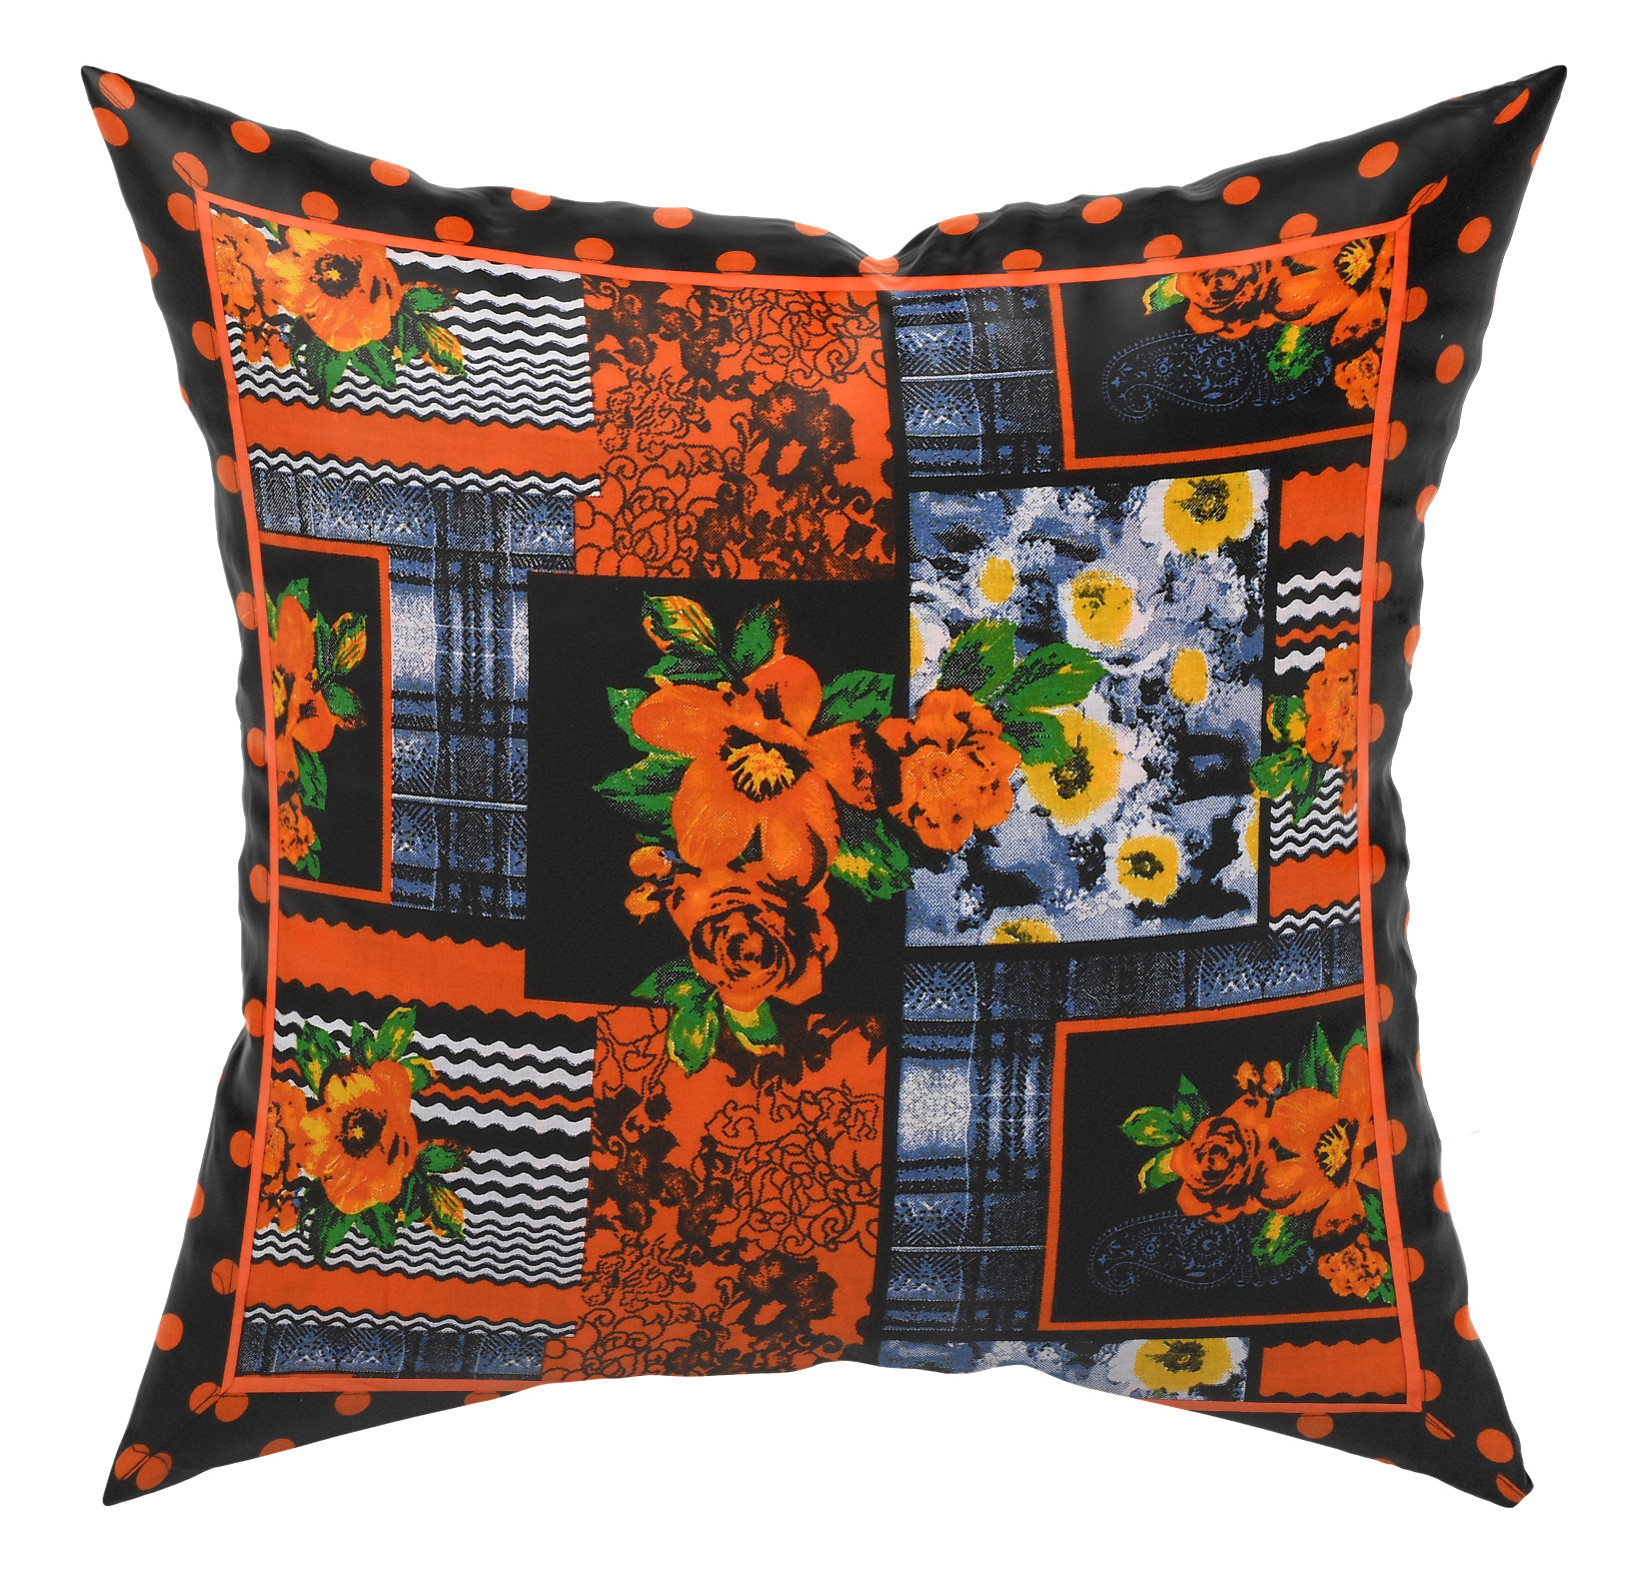 Kuber Industries Floral Print Cotton Abstract Decorative Throw Pillow/Cushion Covers 16